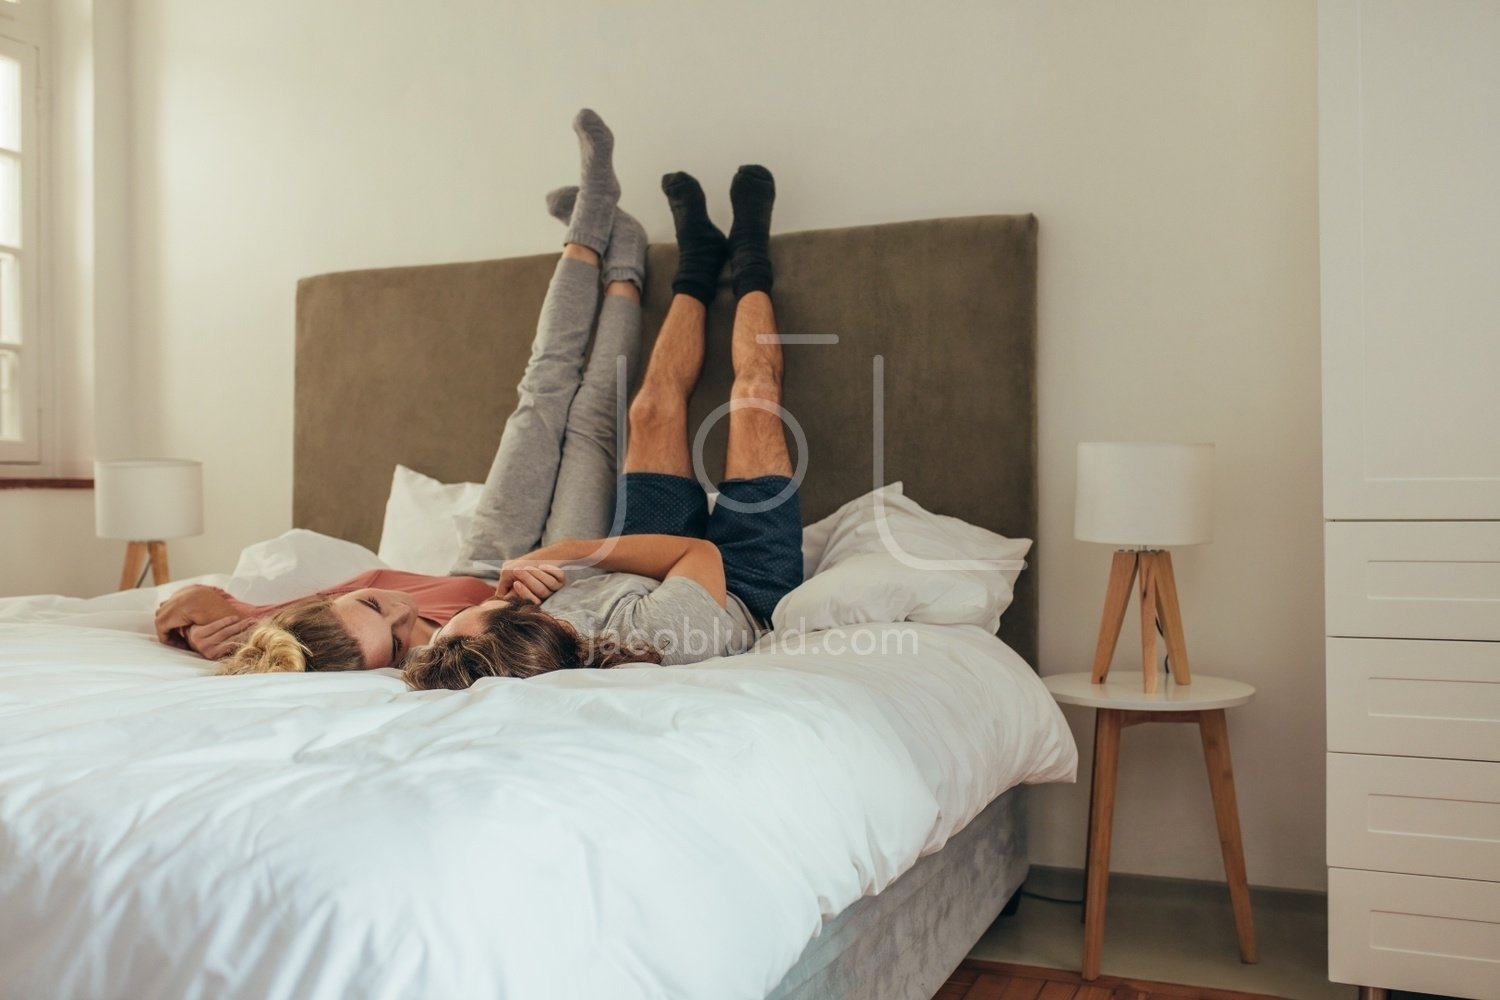 Romantic Couple Lying On Bed Together With Raised Legs